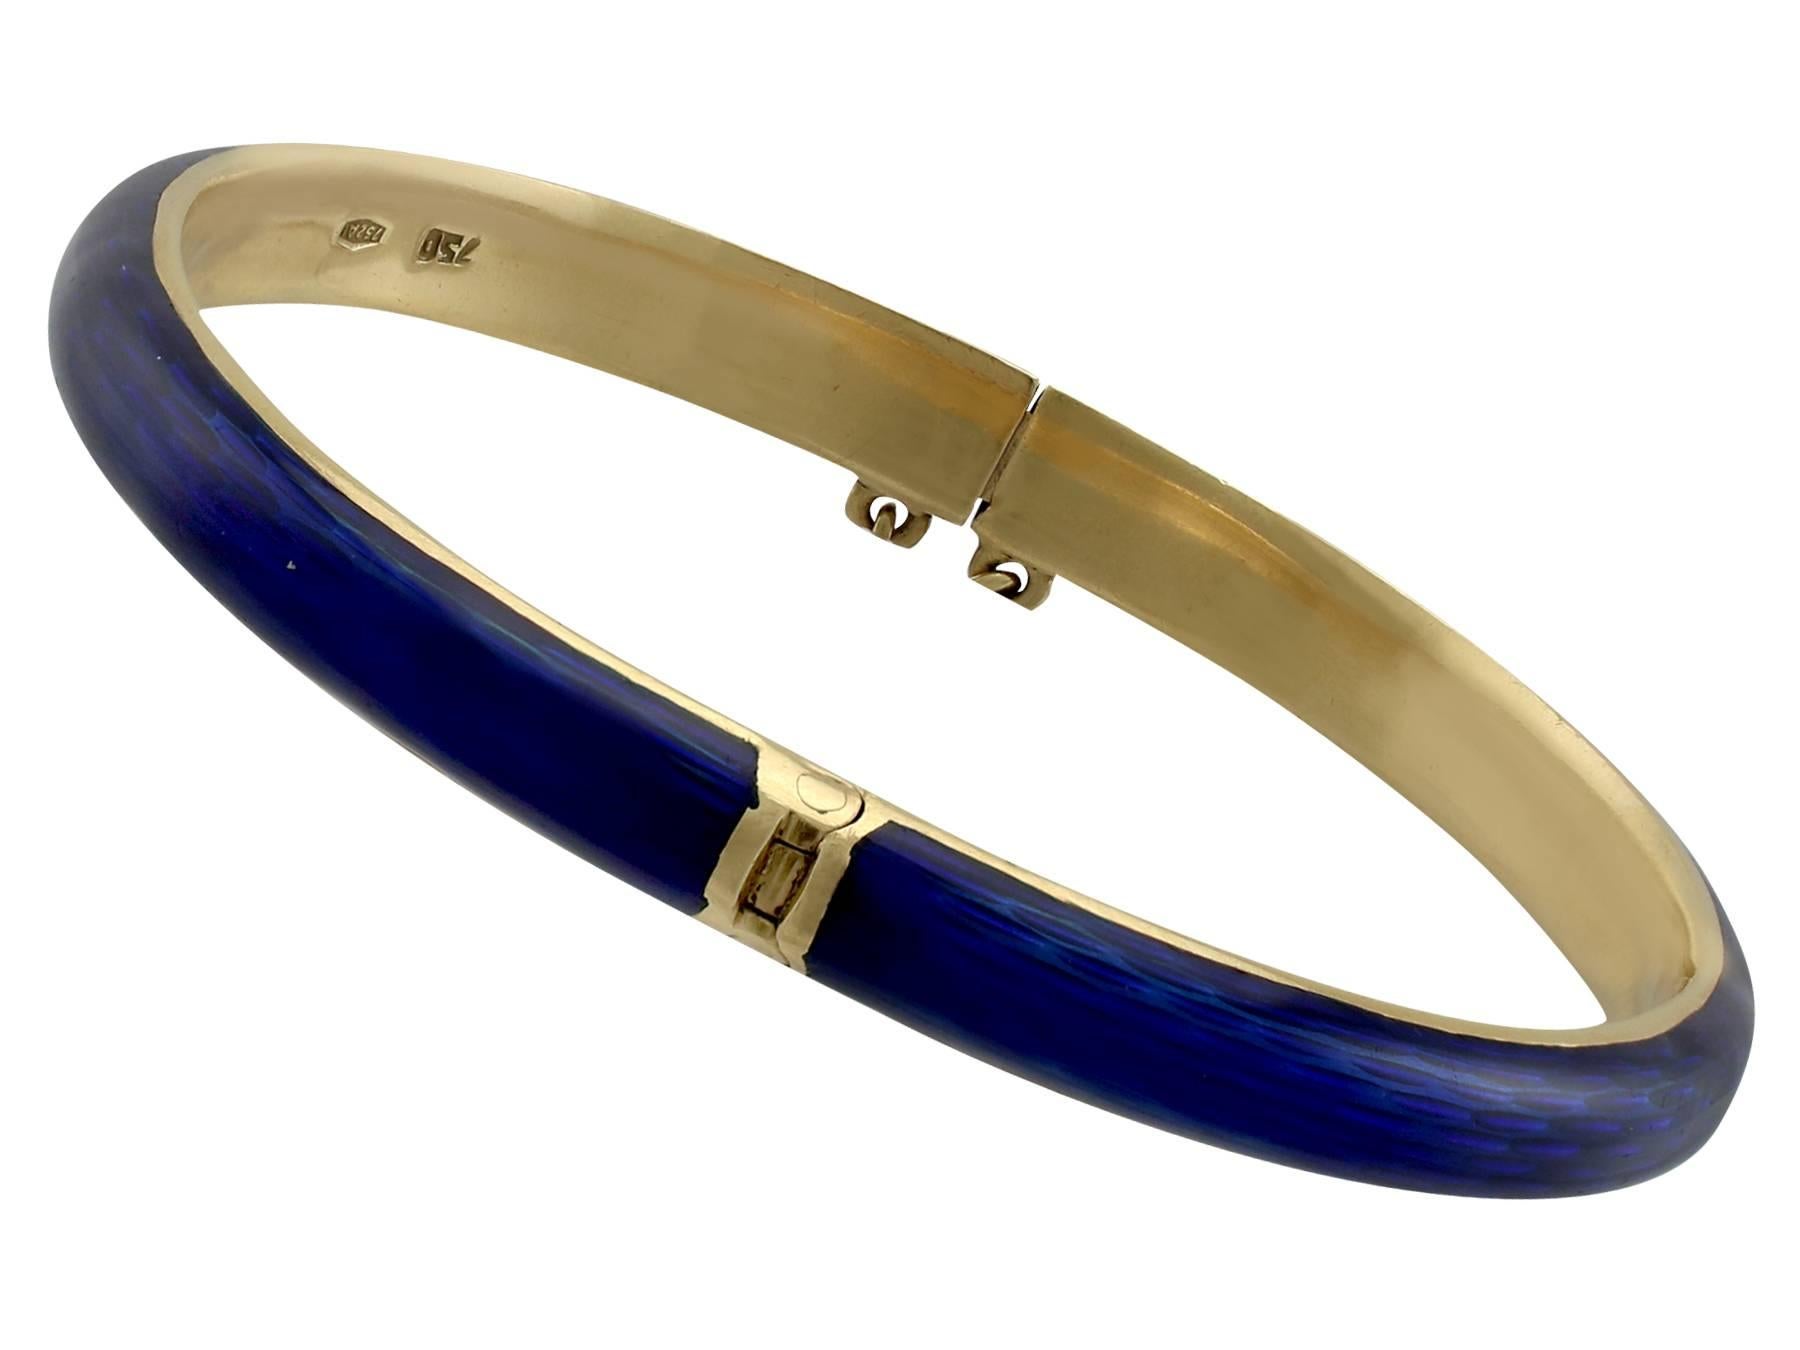 A fine and impressive vintage Italian blue guilloché enamel and 18 karat yellow gold bangle; part of our diverse antique jewelry collections

This fine and impressive vintage enamel bangle has been crafted in 18k yellow gold.

The outer surface of